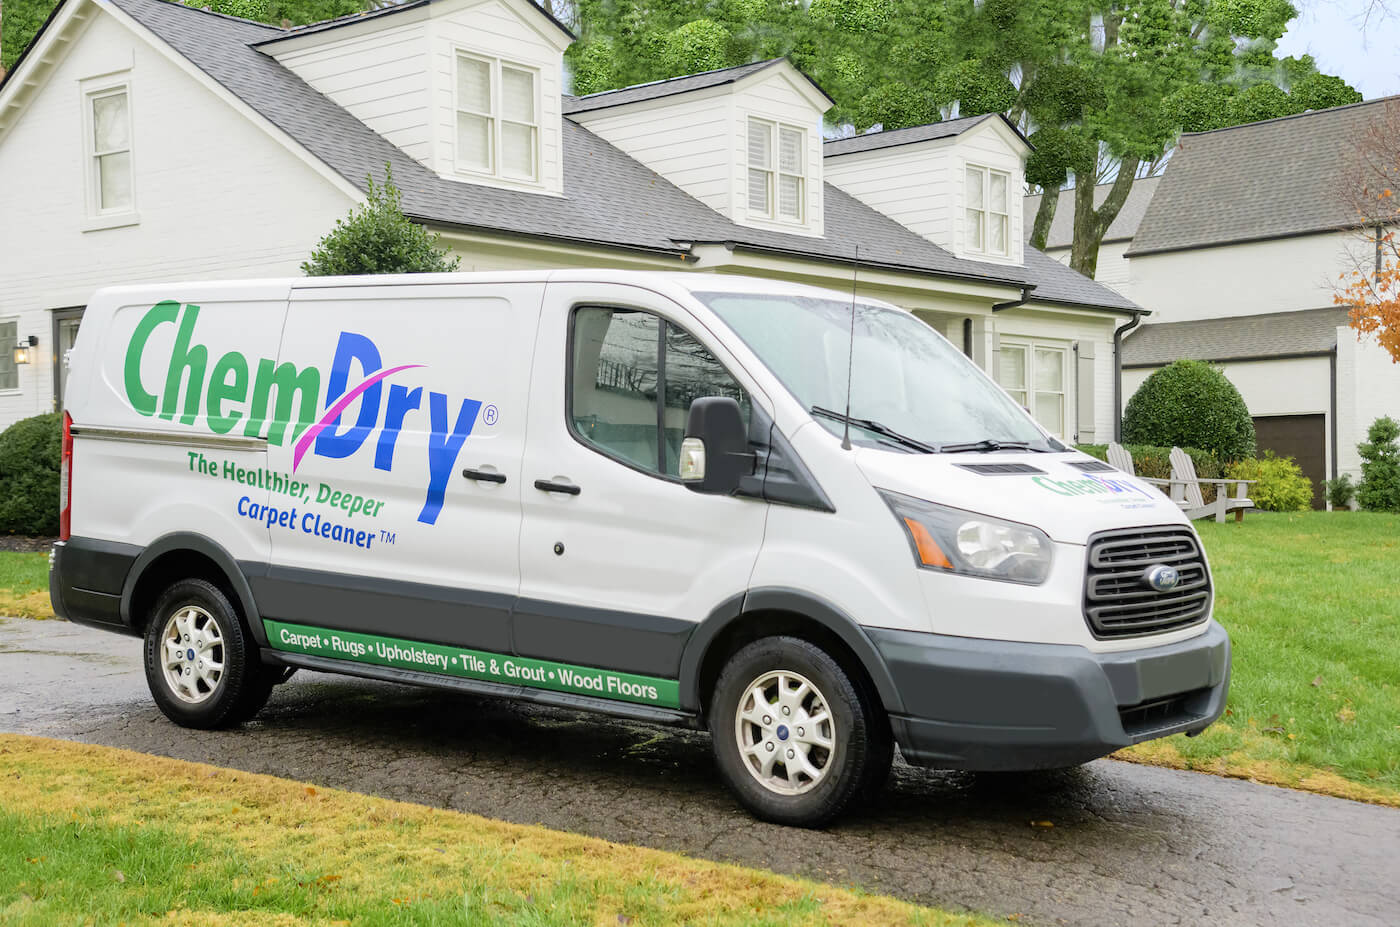 Chem-Dry van in a driveway the healthier, deeper carpet cleaner